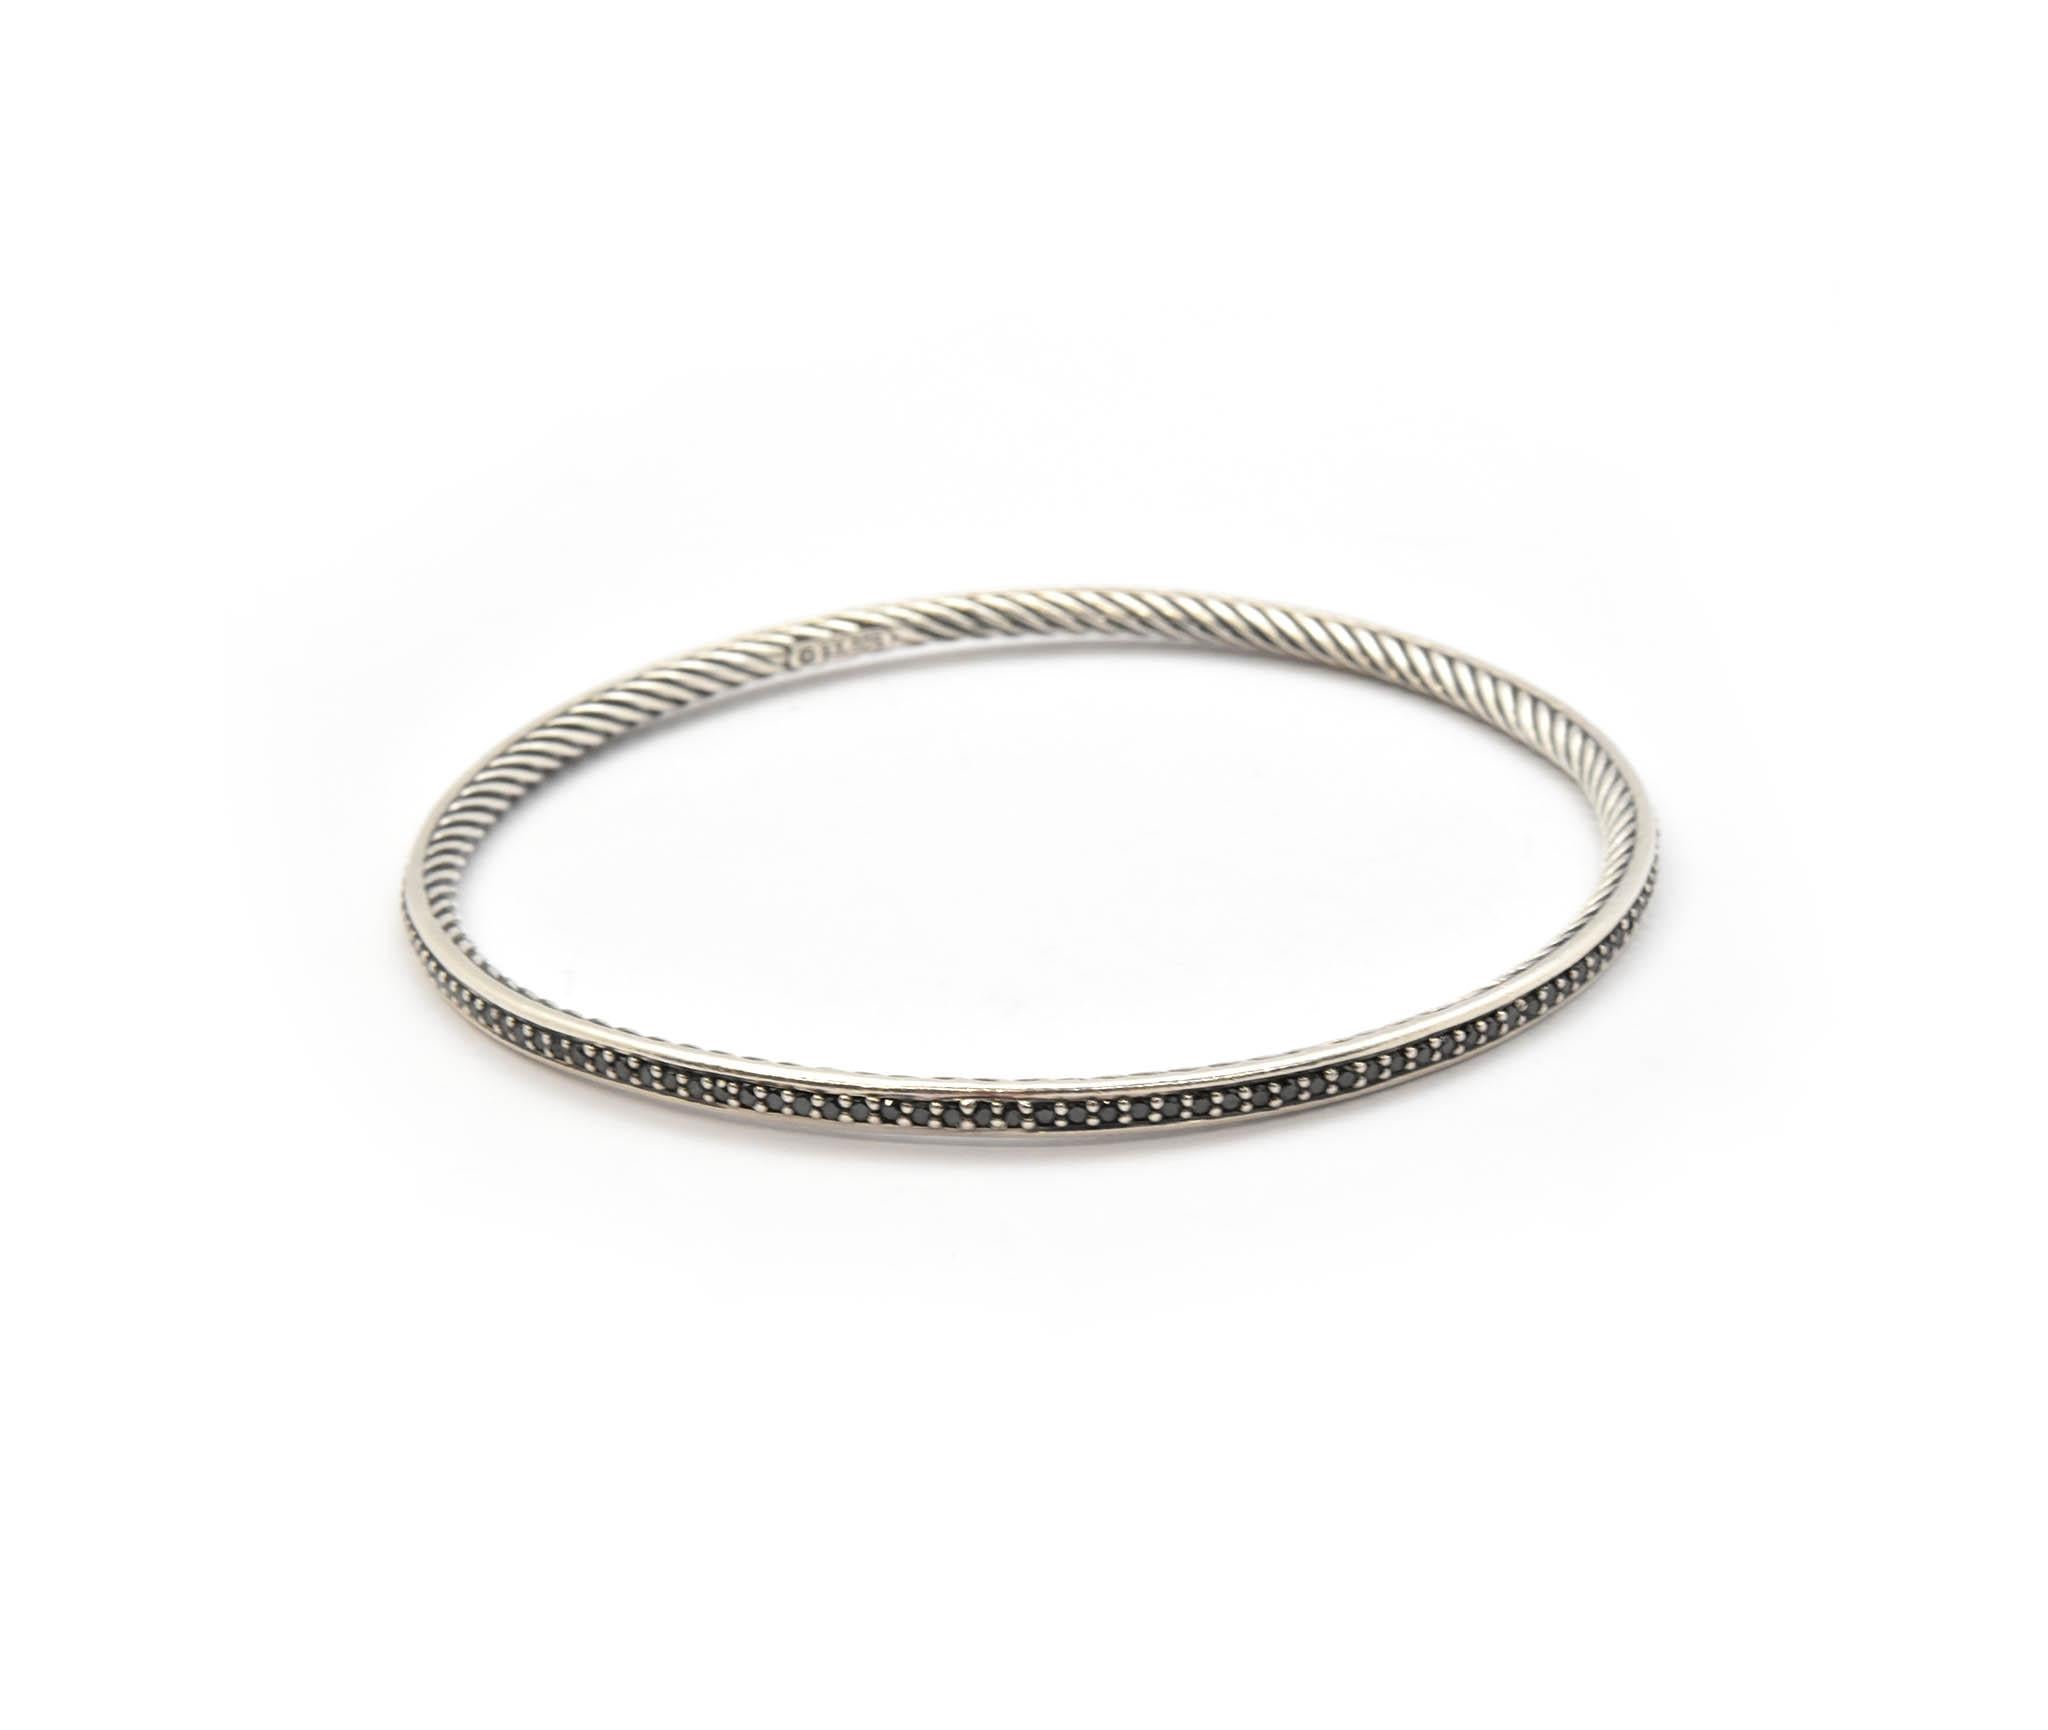 This David Yurman cable bangle is fashioned from sterling silver and set with black diamonds on the outside of the bangle! The black diamonds are round and each is held into place by sterling silver prongs. Classic David Yurman cable designs are on